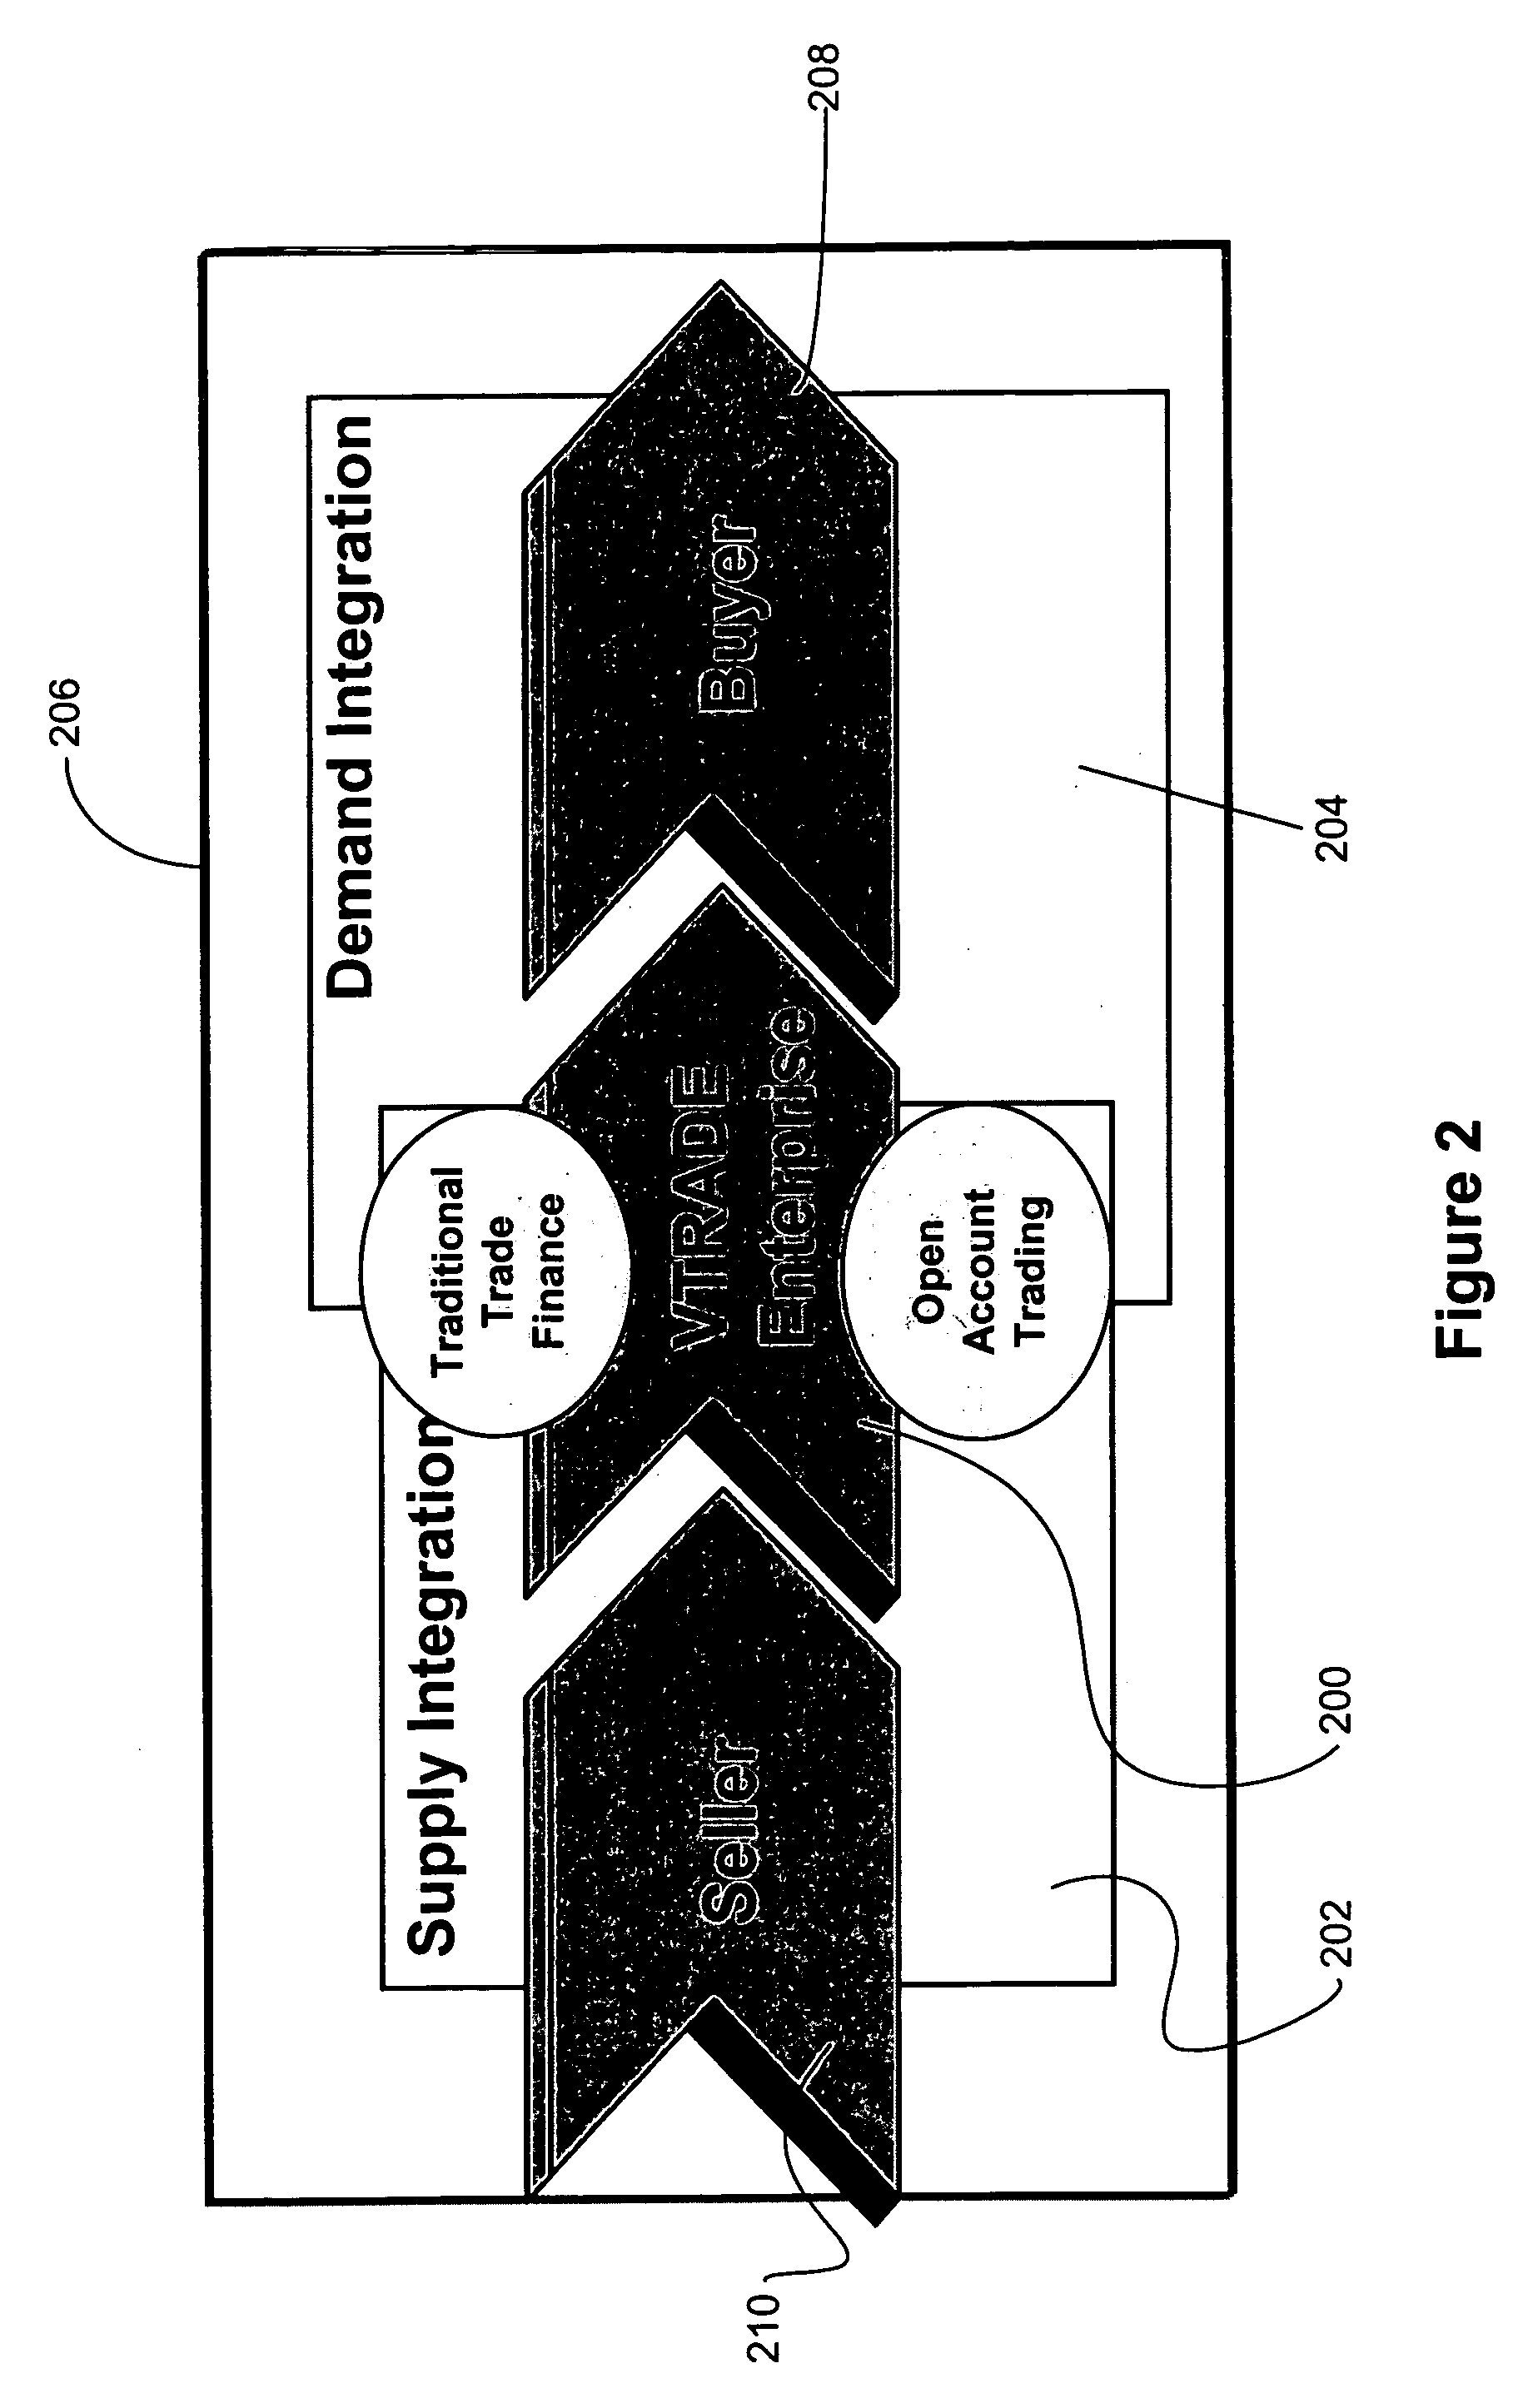 System, method and article of manufacture for initiation of bidding in a virtual trade financial environment